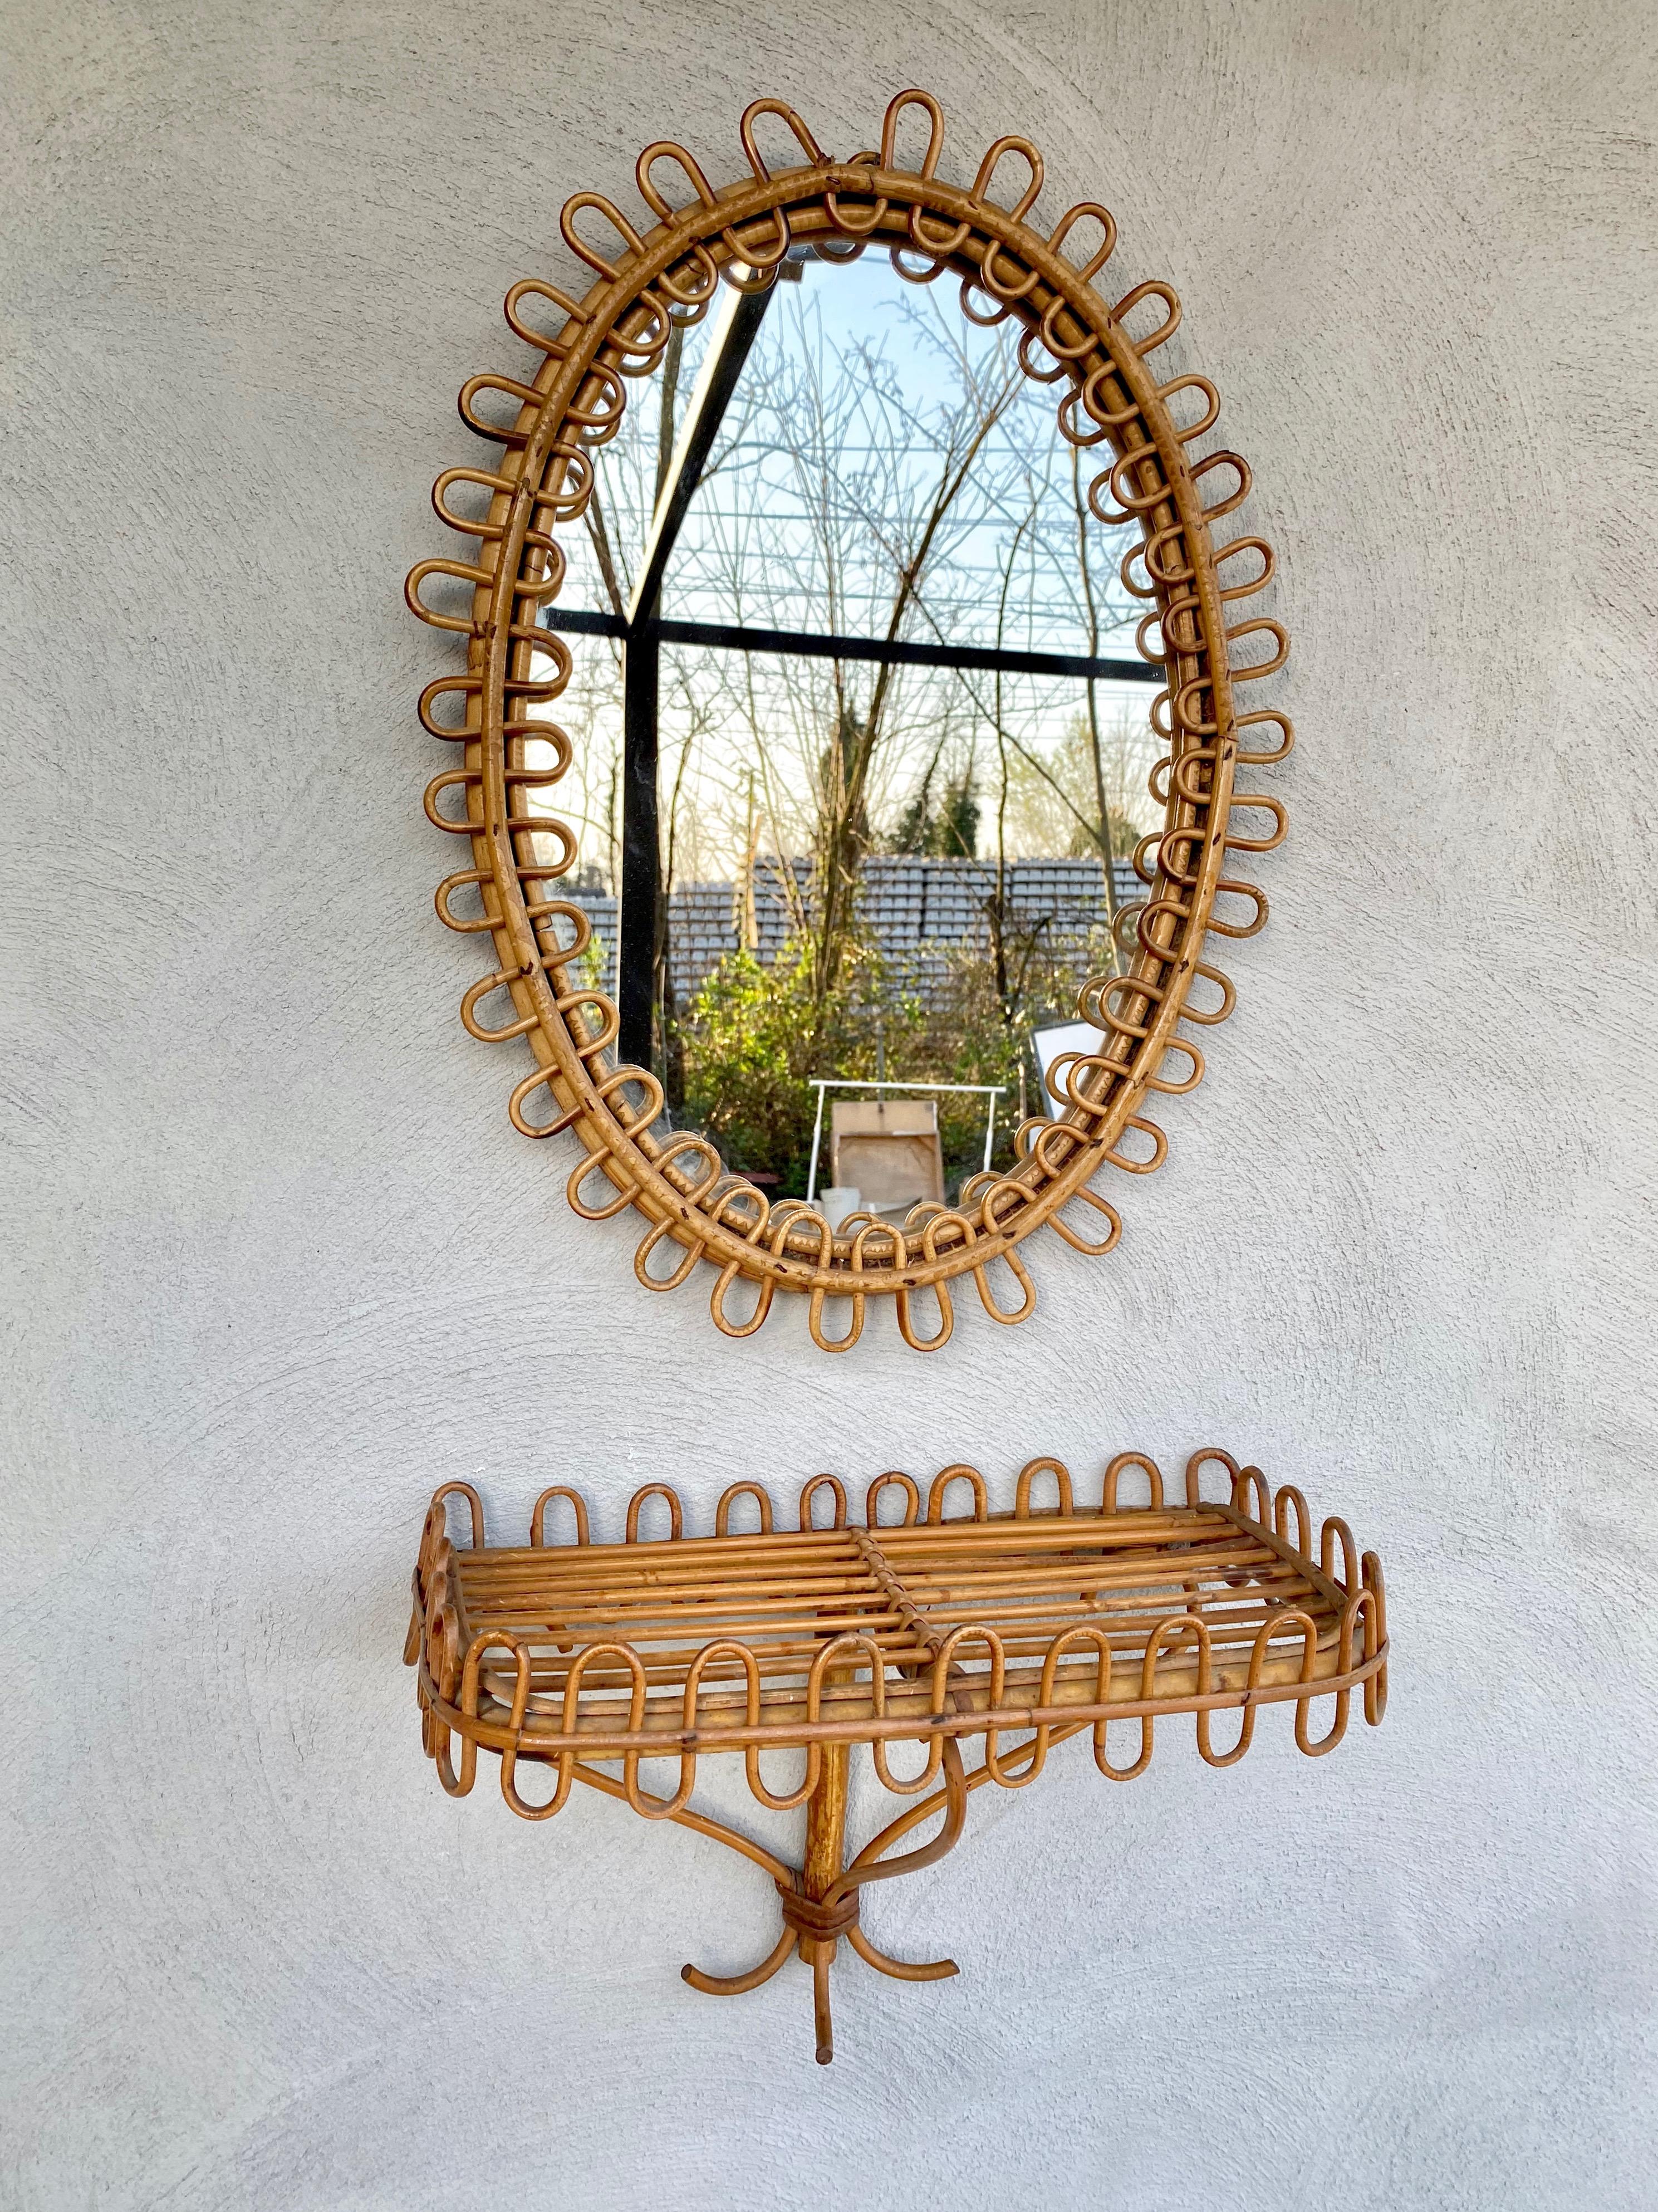 Rattan wall mirror and bedside wall-mounted table shelf by the Italian designer Franco Albini. Made in Italy, circa 1960.

Dimensions:
Mirror measures: height 57cm, width 41cm, depth 3cm.
Shelf measures: height 25cm, width 39cm, depth 22cm.